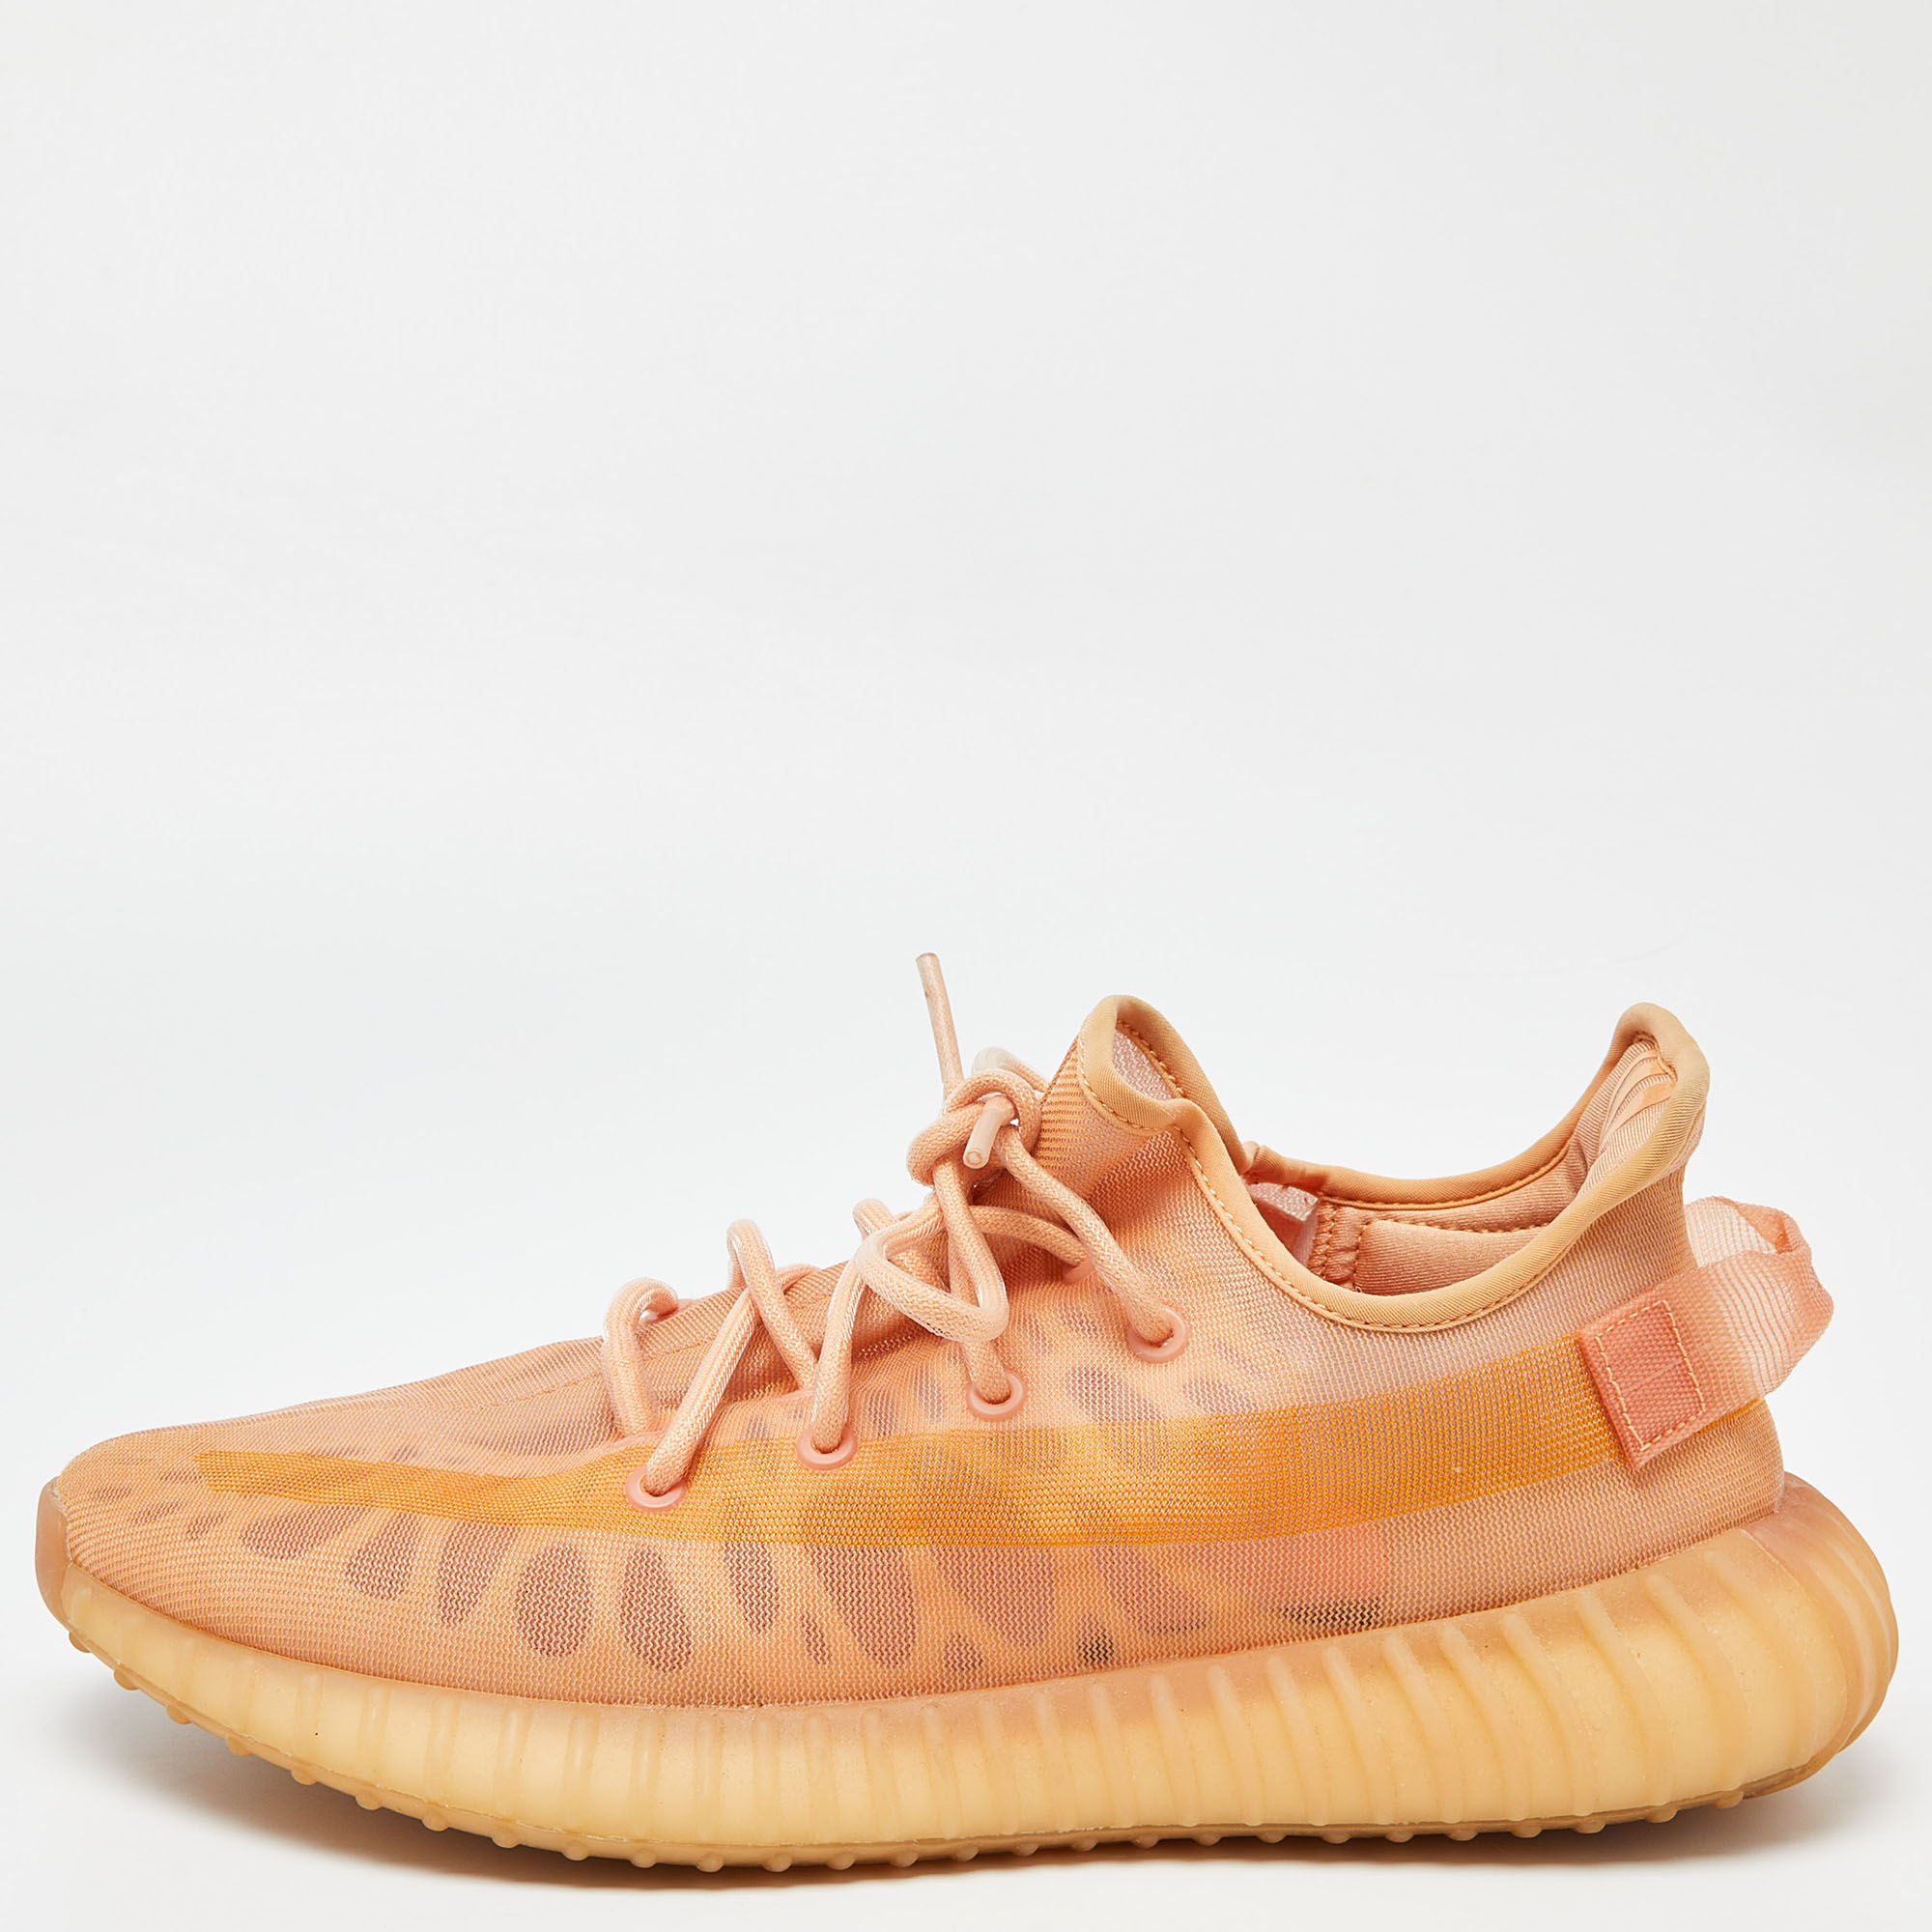 Pre-owned Yeezy X Adidas Orange Mesh Boost 350 V2 Mono Clay Trainers Size 46